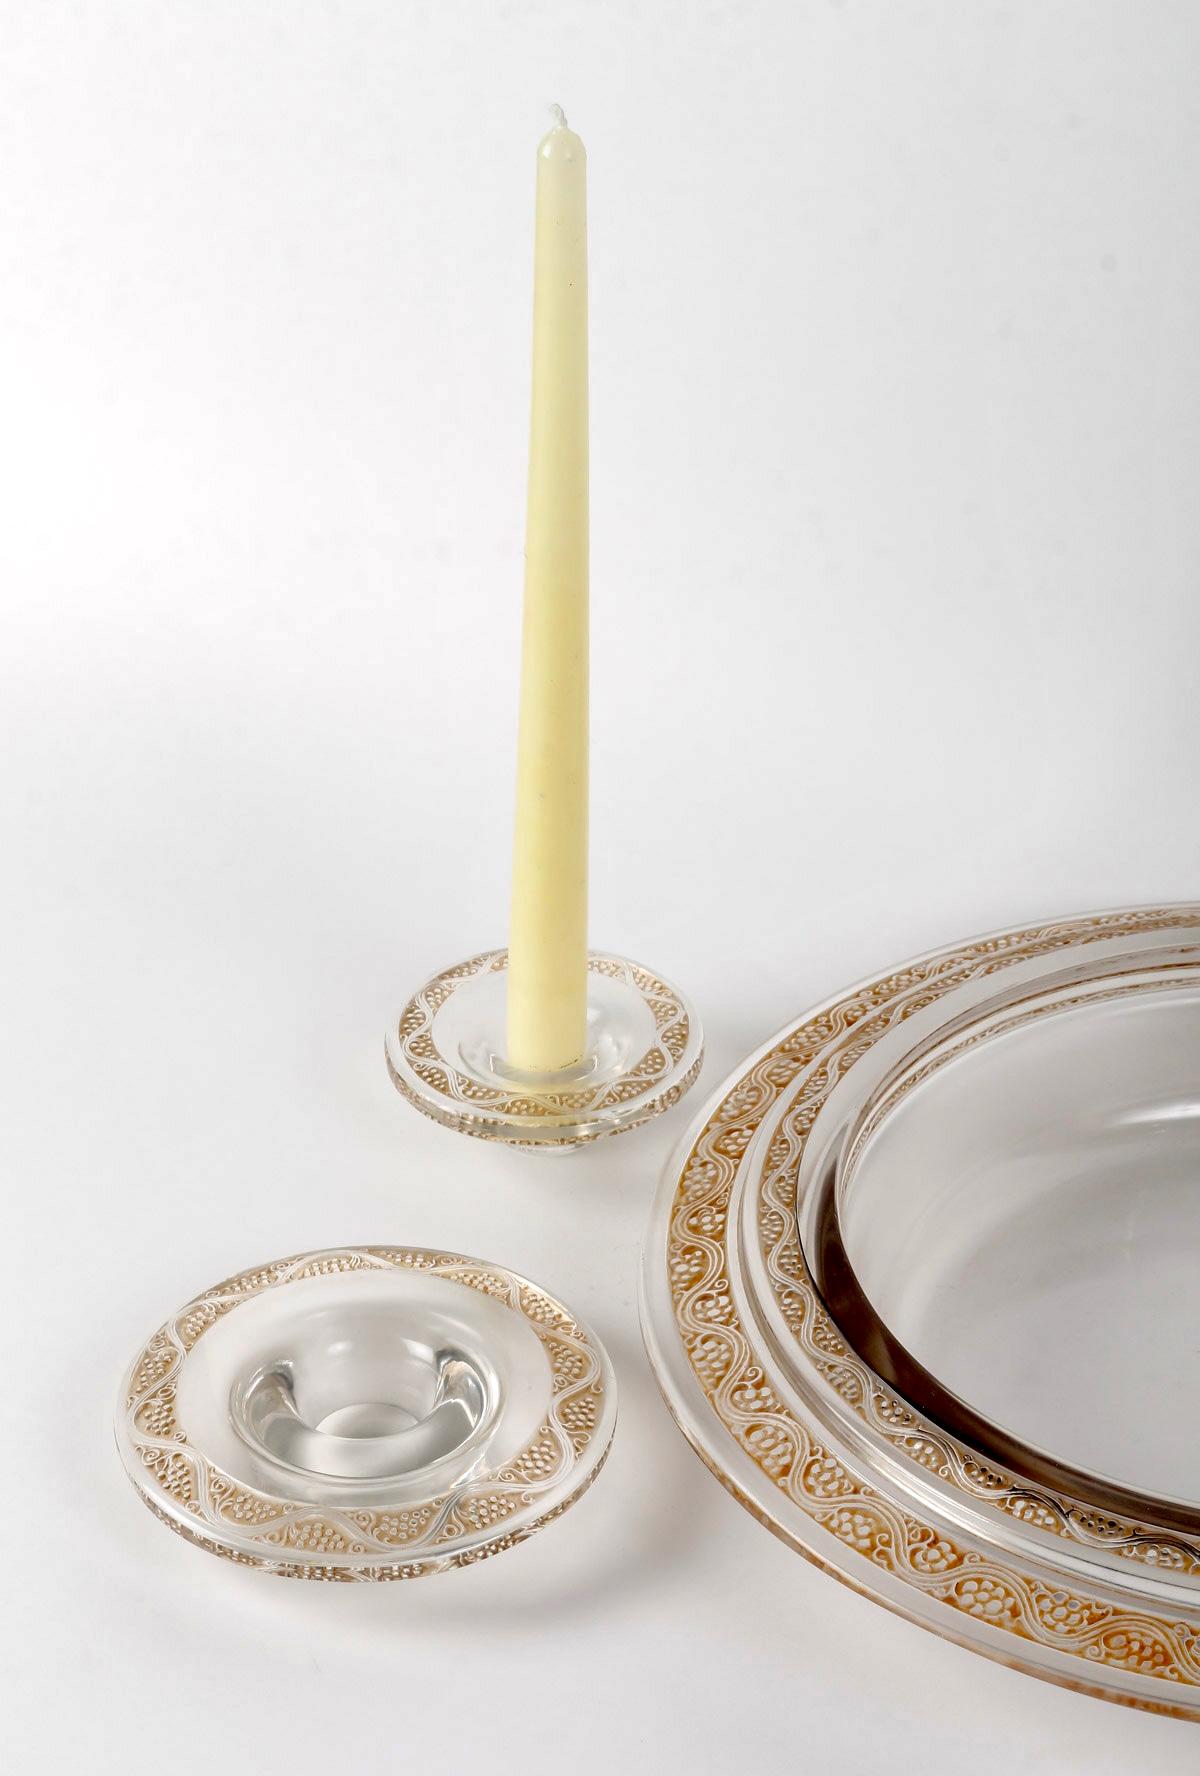 Art Deco René Lalique - Pair of Candlesticks and Bowl Ricquewihr Glass with Sepia Patina For Sale